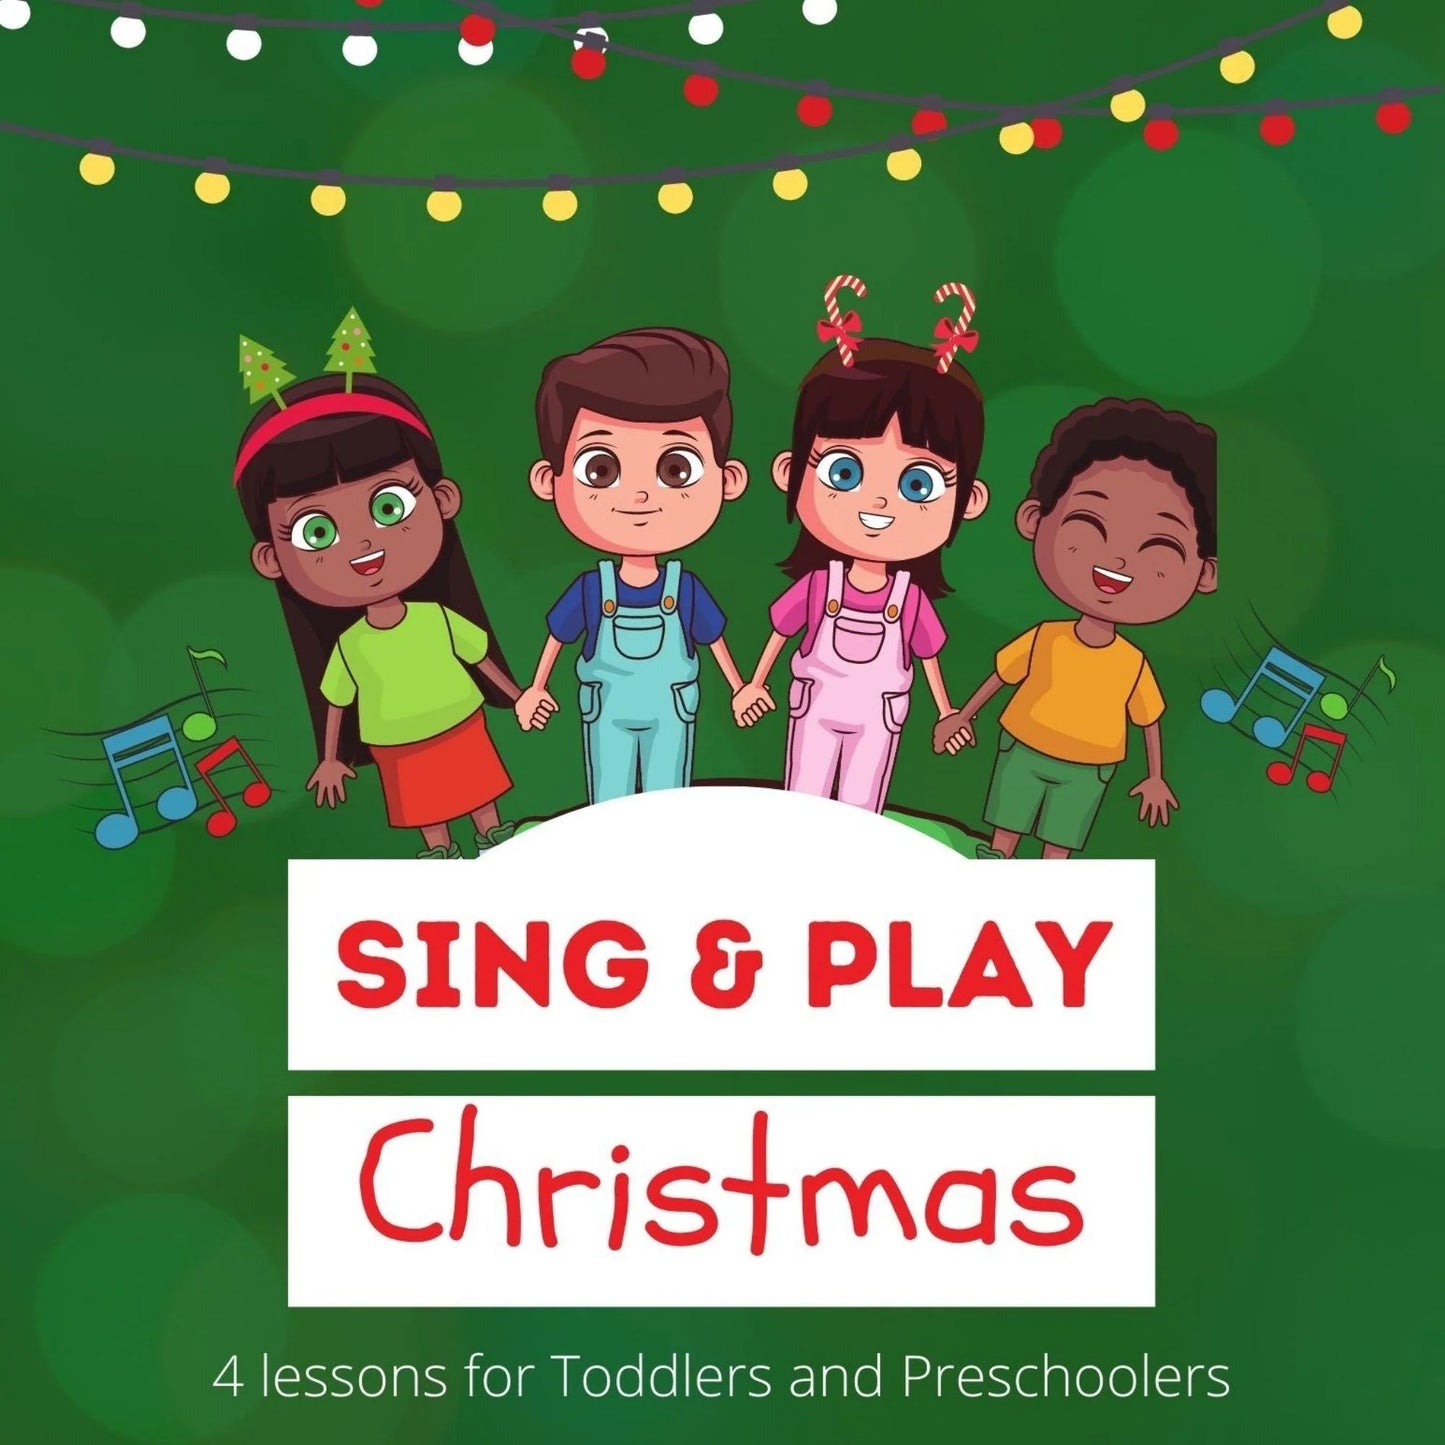 Sing and Play Christmas: 4 Bible Lessons for Preschool and Toddlers - age 1-5 (download only)